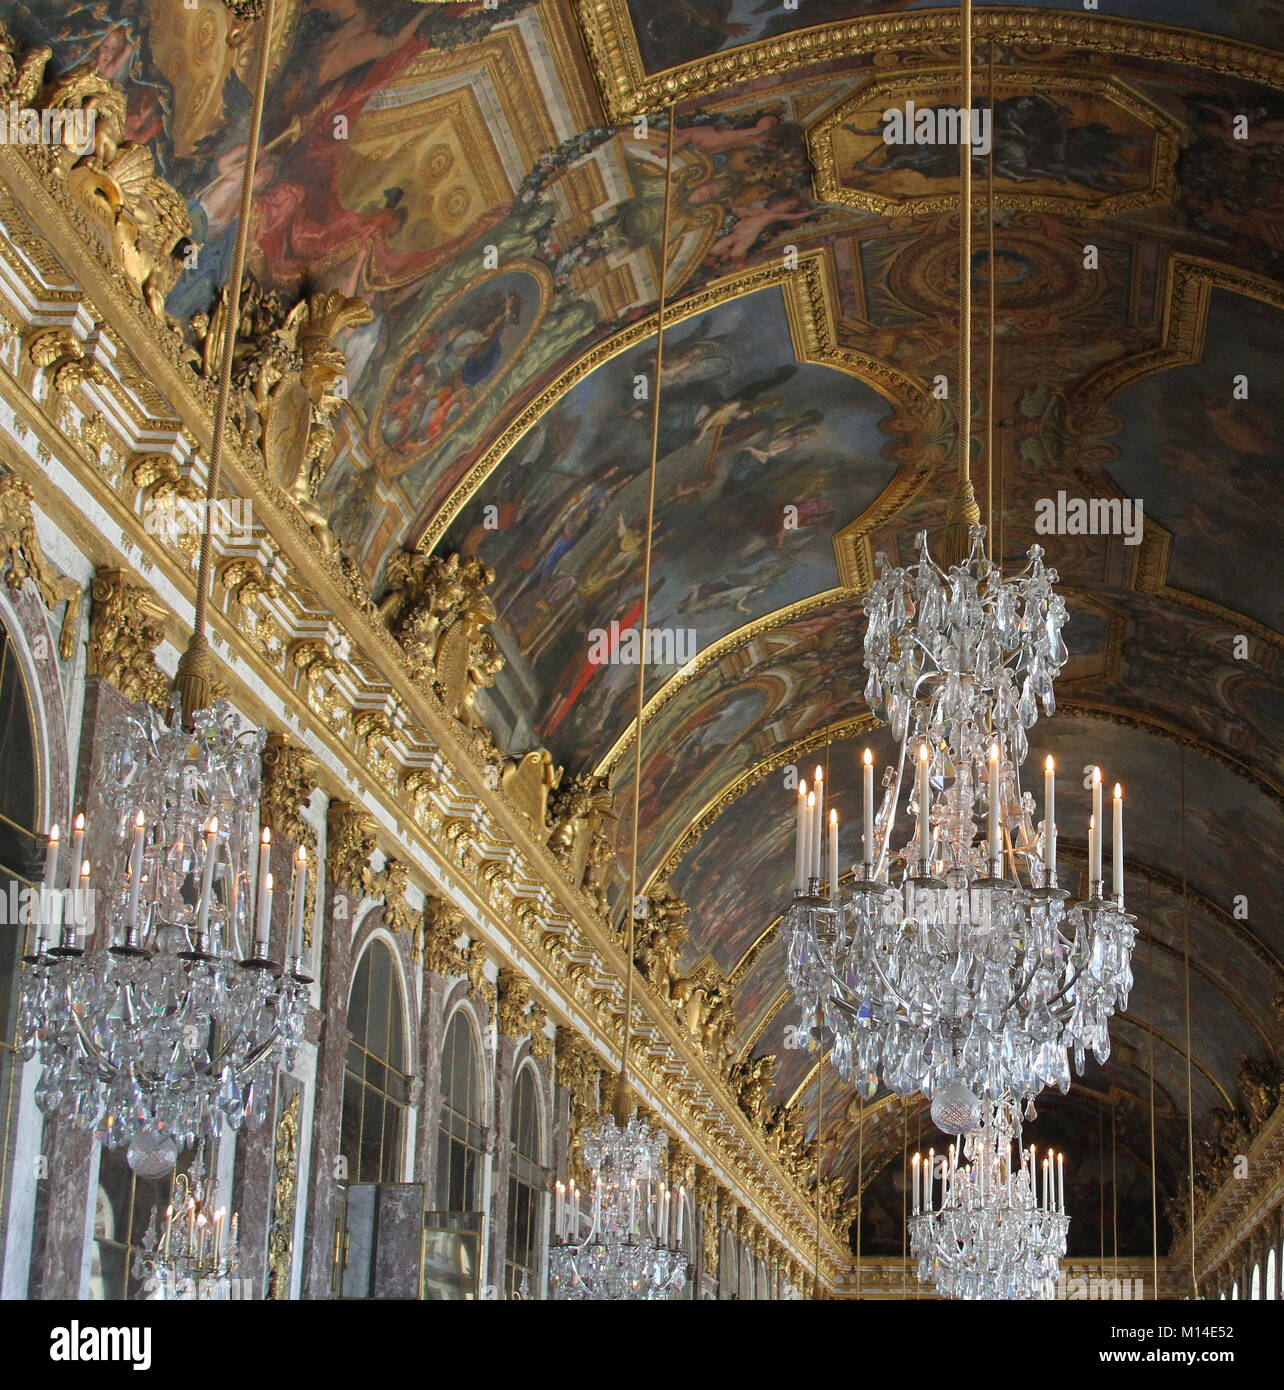 Ceiling Of The Hall Of Mirrors Versailles Palace Ile De France